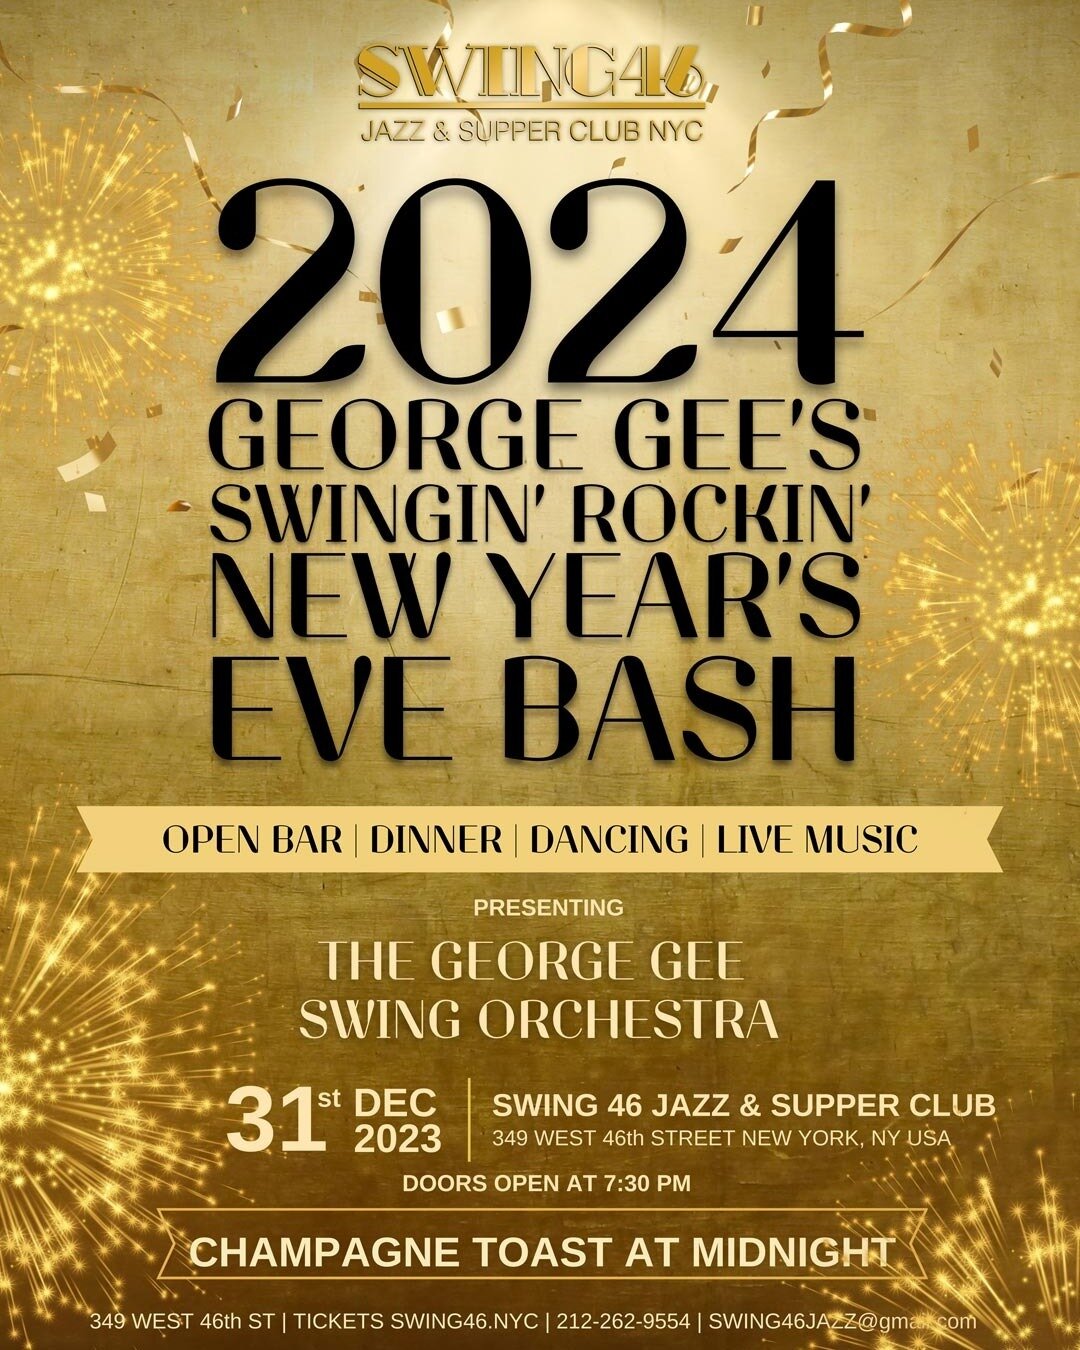 our third year in a row bringing in the New Year at @swing46nyc this Sunday, December 31st, tickets at www.swing46.nyc/NYE
.
.
.
.
.
#GeorgeGee #BestCountdownThisSideofBroadway #NYE #NewYearsEve #JazzClub #TimesSquare #NYC #NewYorkCity #JazzMusic #Ja